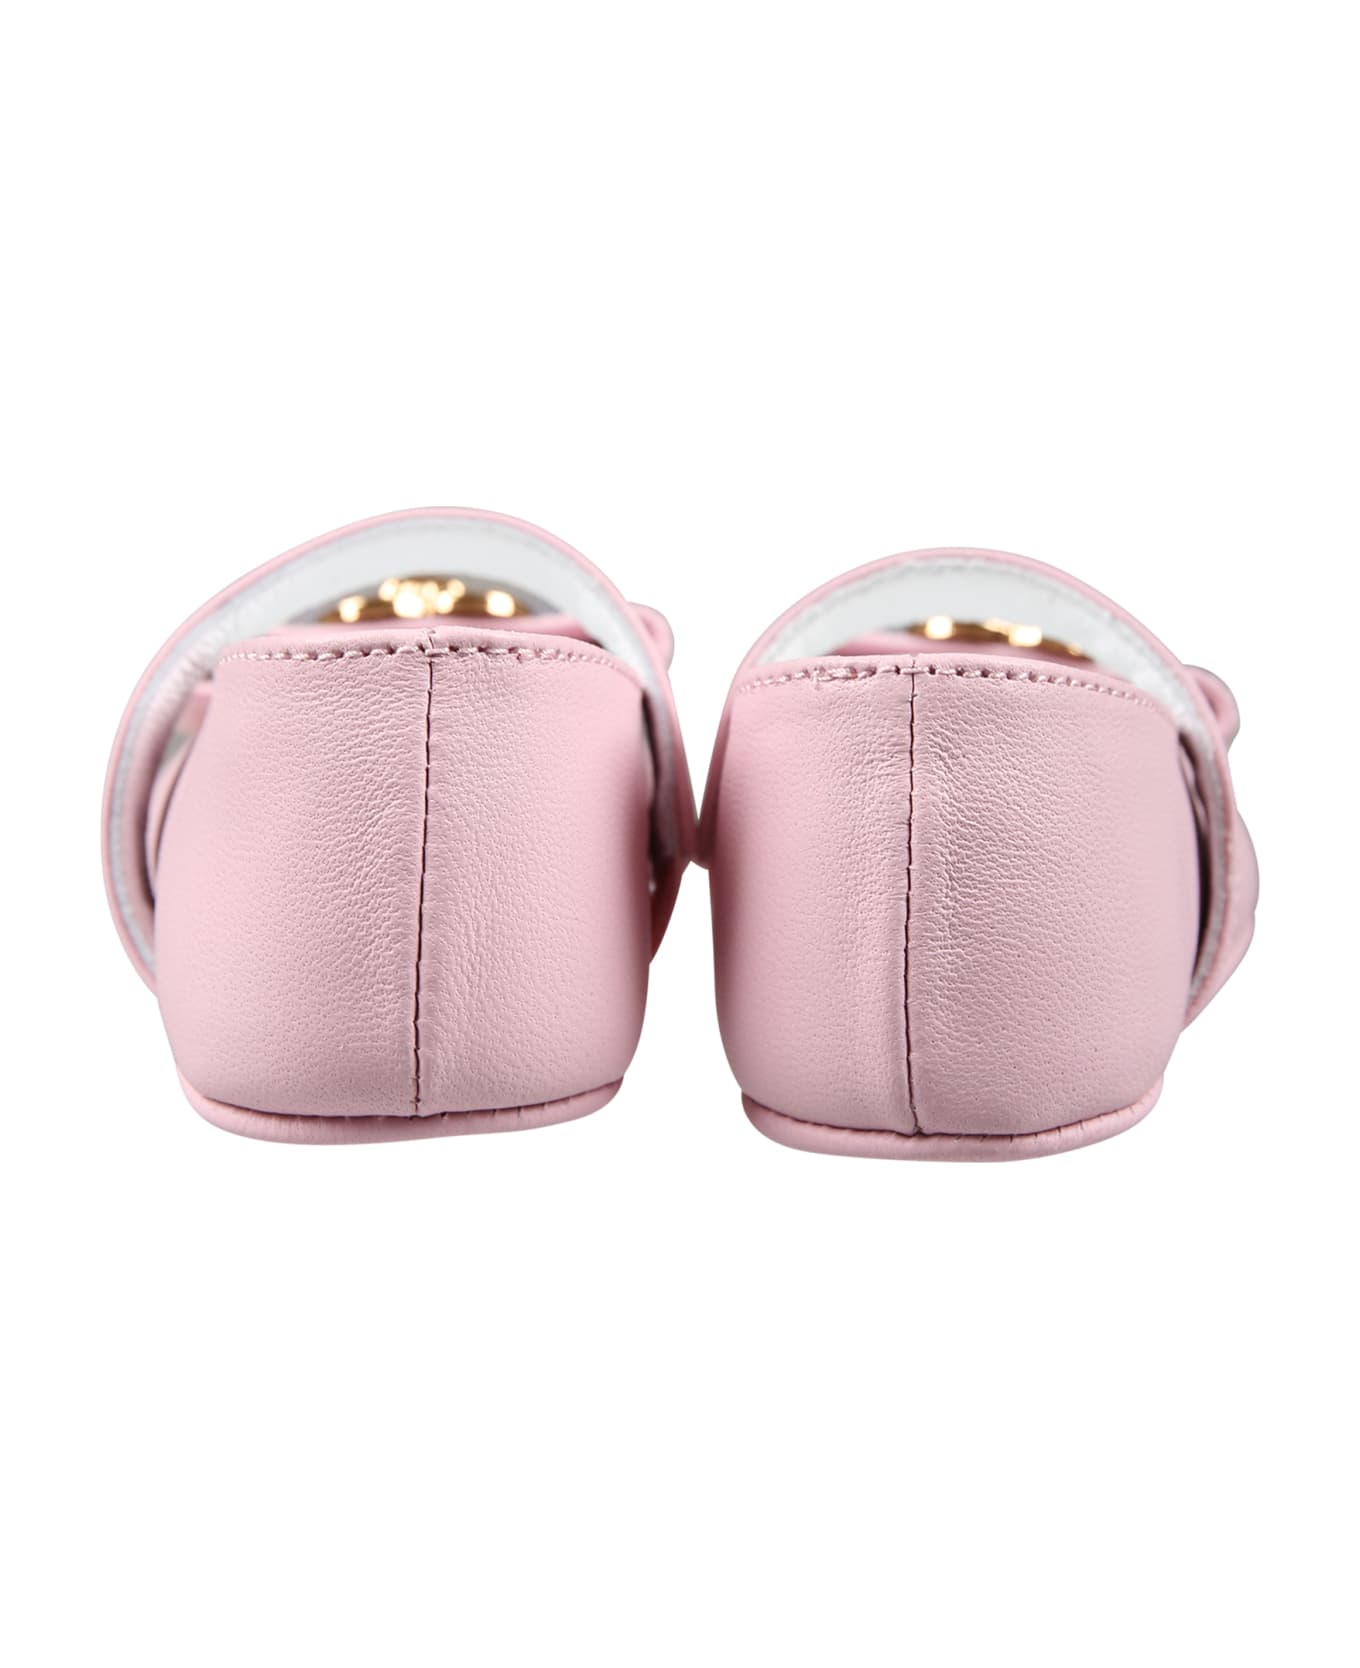 Versace Pink Ballet Flats For Baby Girl With Heart And Medusa - Pink